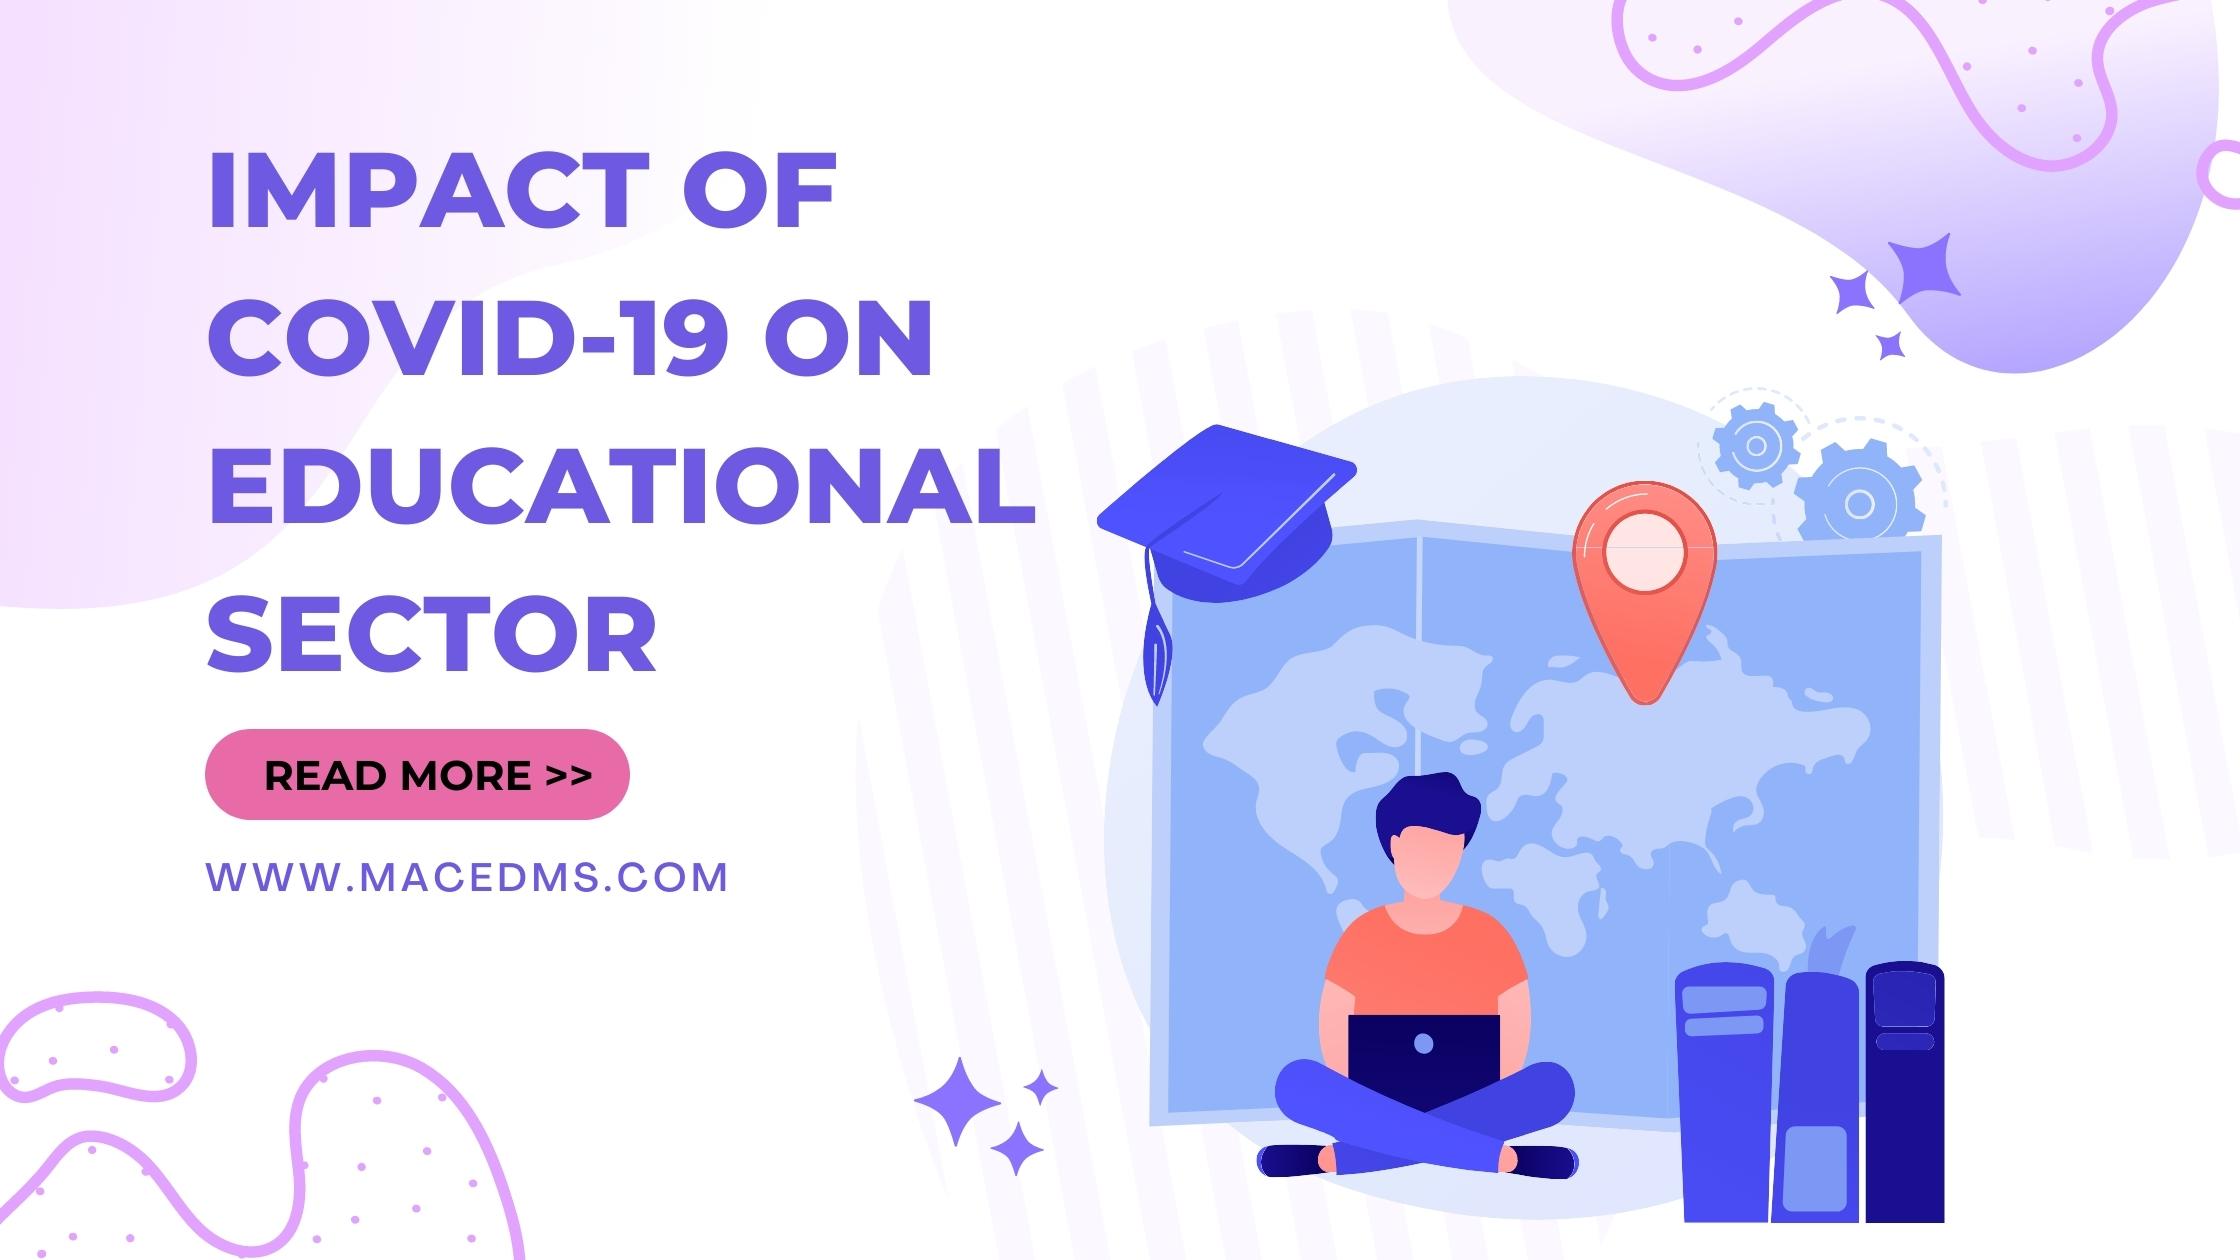 Impact of Covid-19 on Educational sector